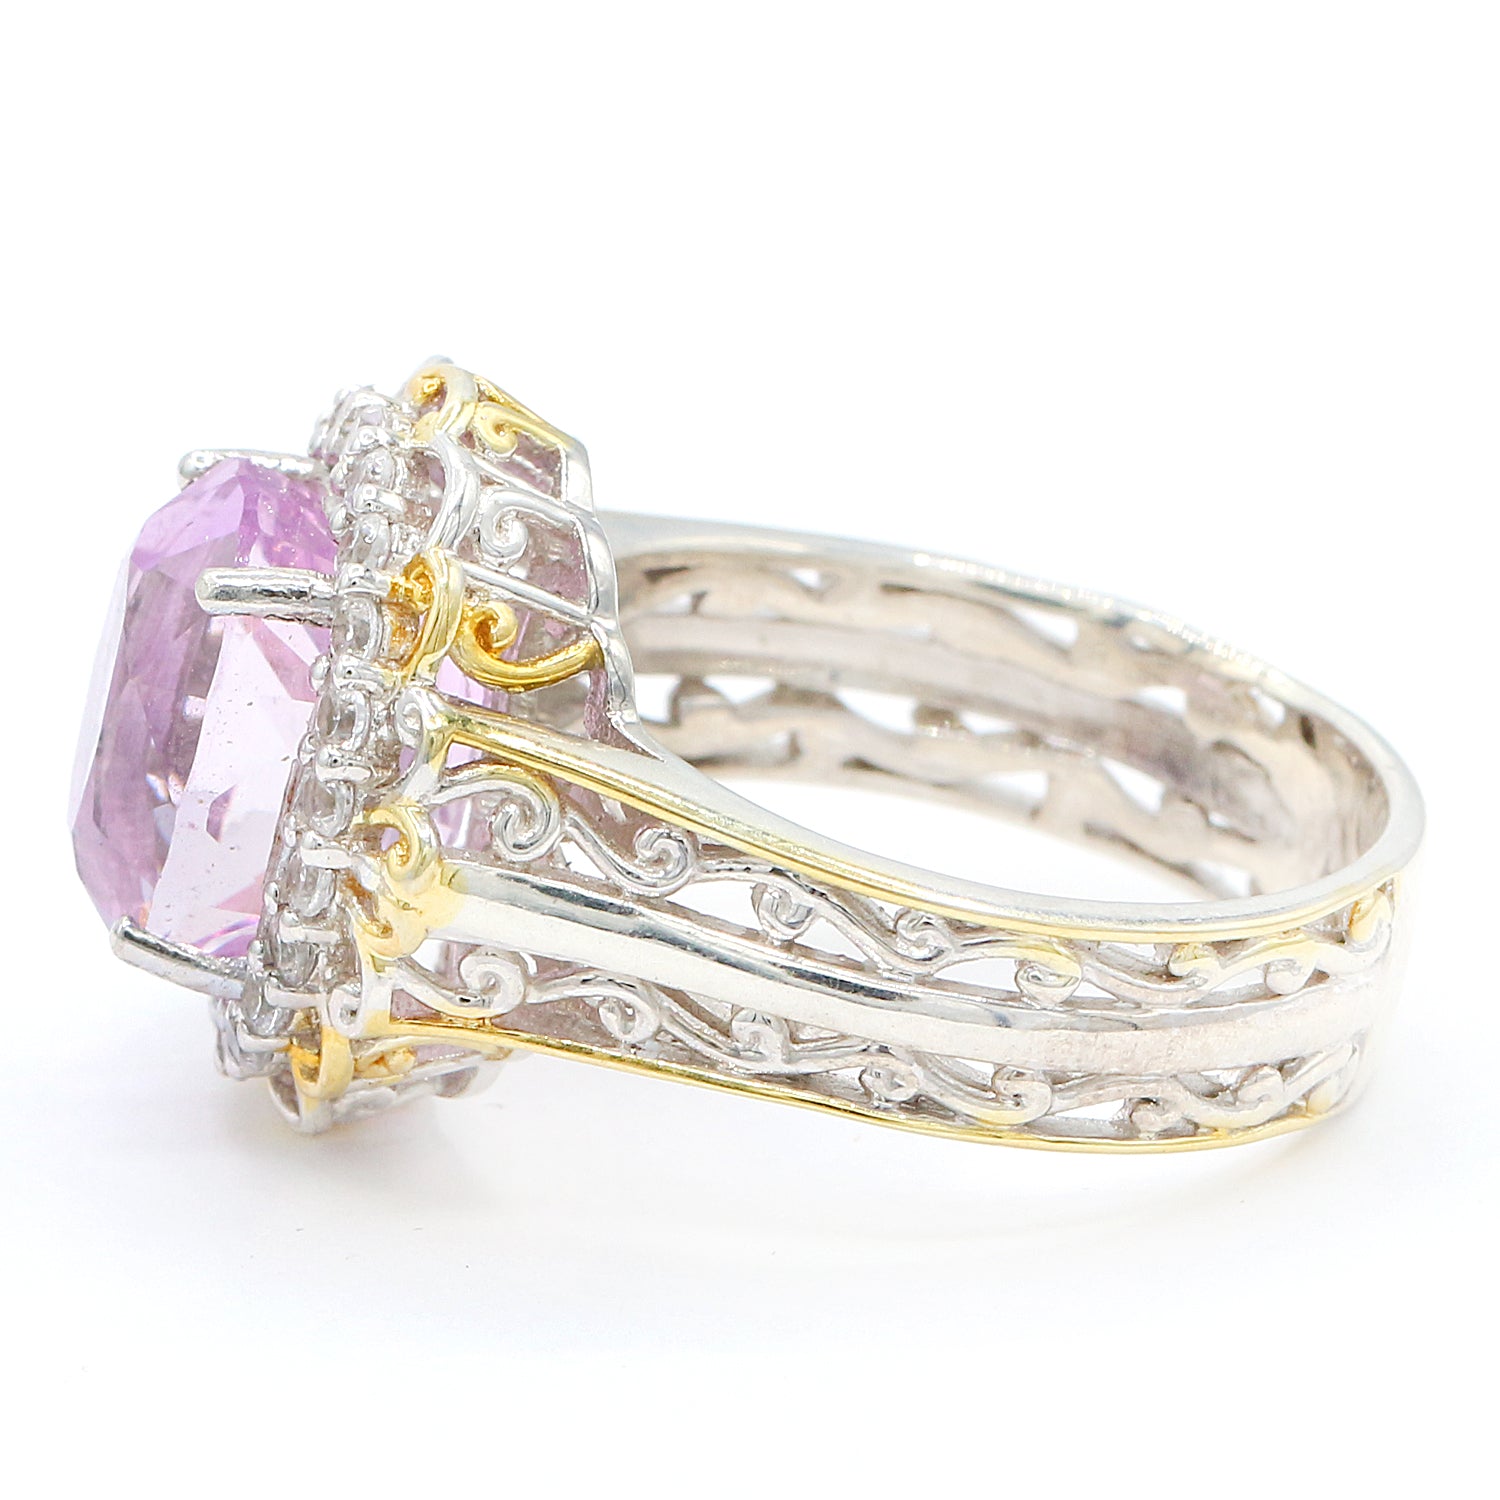 Limited Edition Gems en Vogue One-of-a-kind 8.07ctw Kunzite & White Zircon Halo Ring